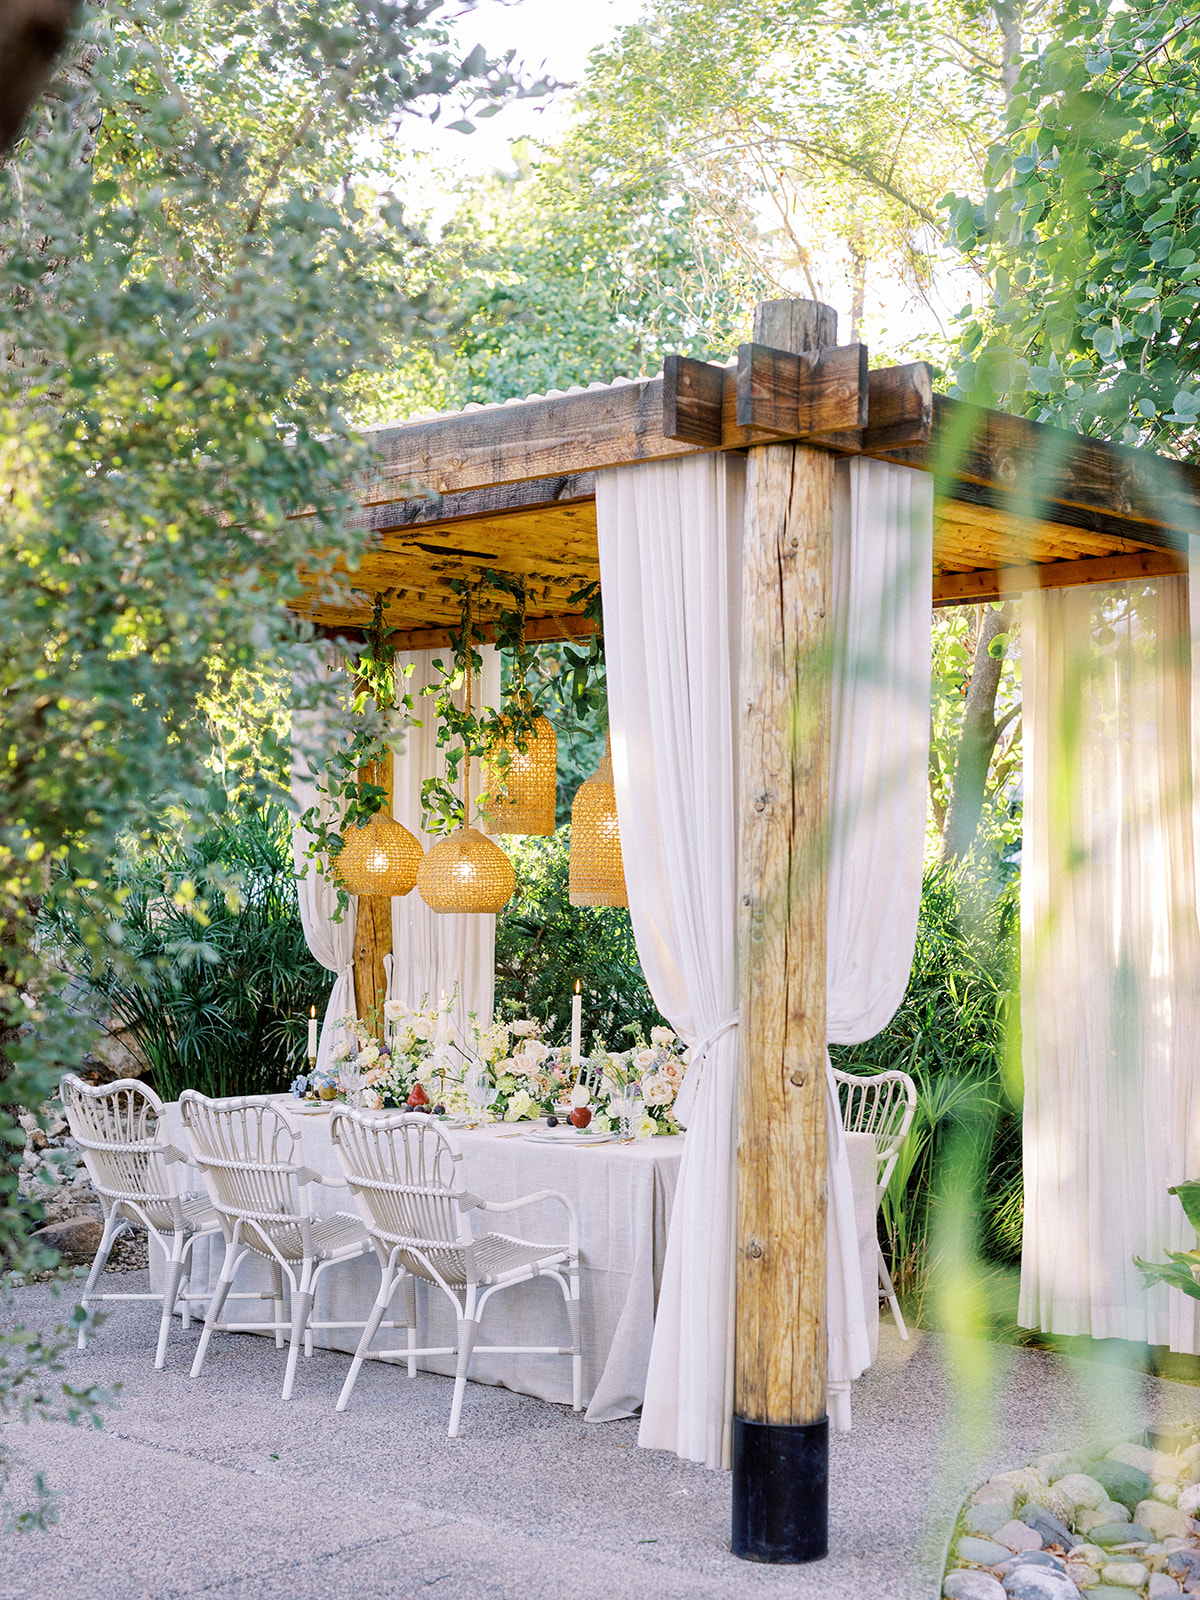 Candles, drapes, florals, fruit & lantern make this Scottsdale wedding table design as romantic & fresh as they come!